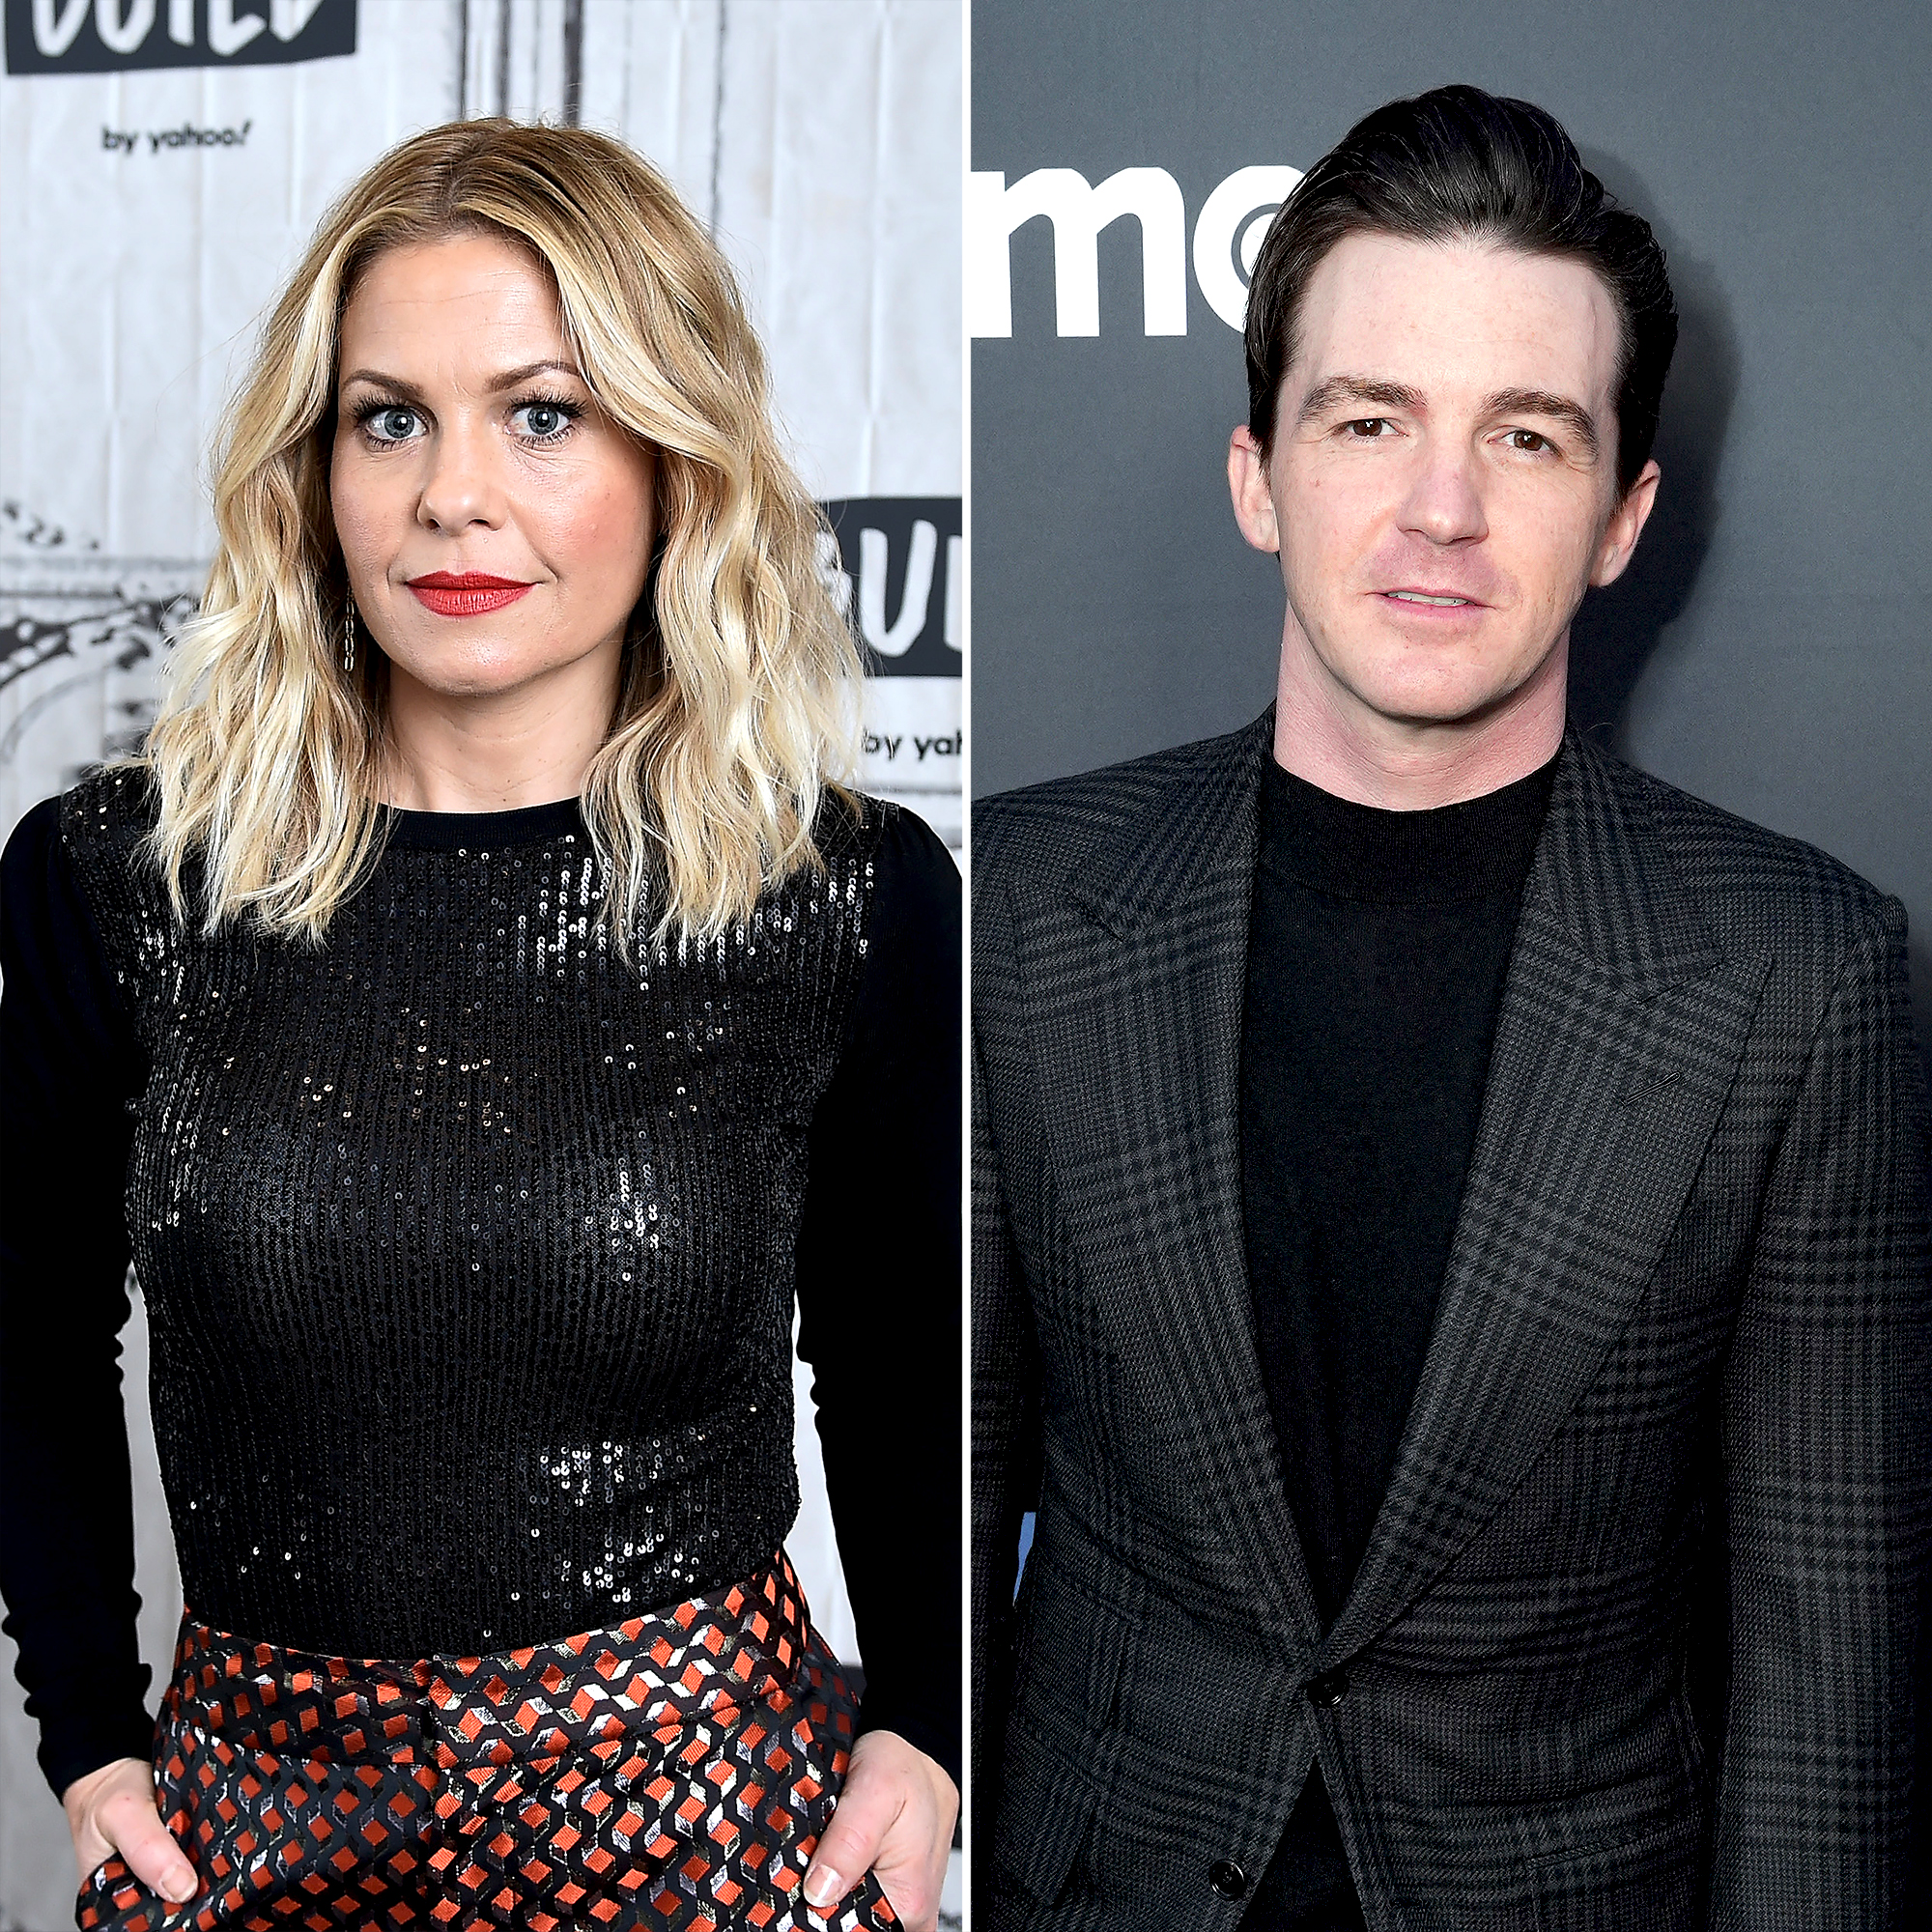 Candace Cameron Bure 'Disturbed' by Drake Bell's 'Quiet on Set' Story